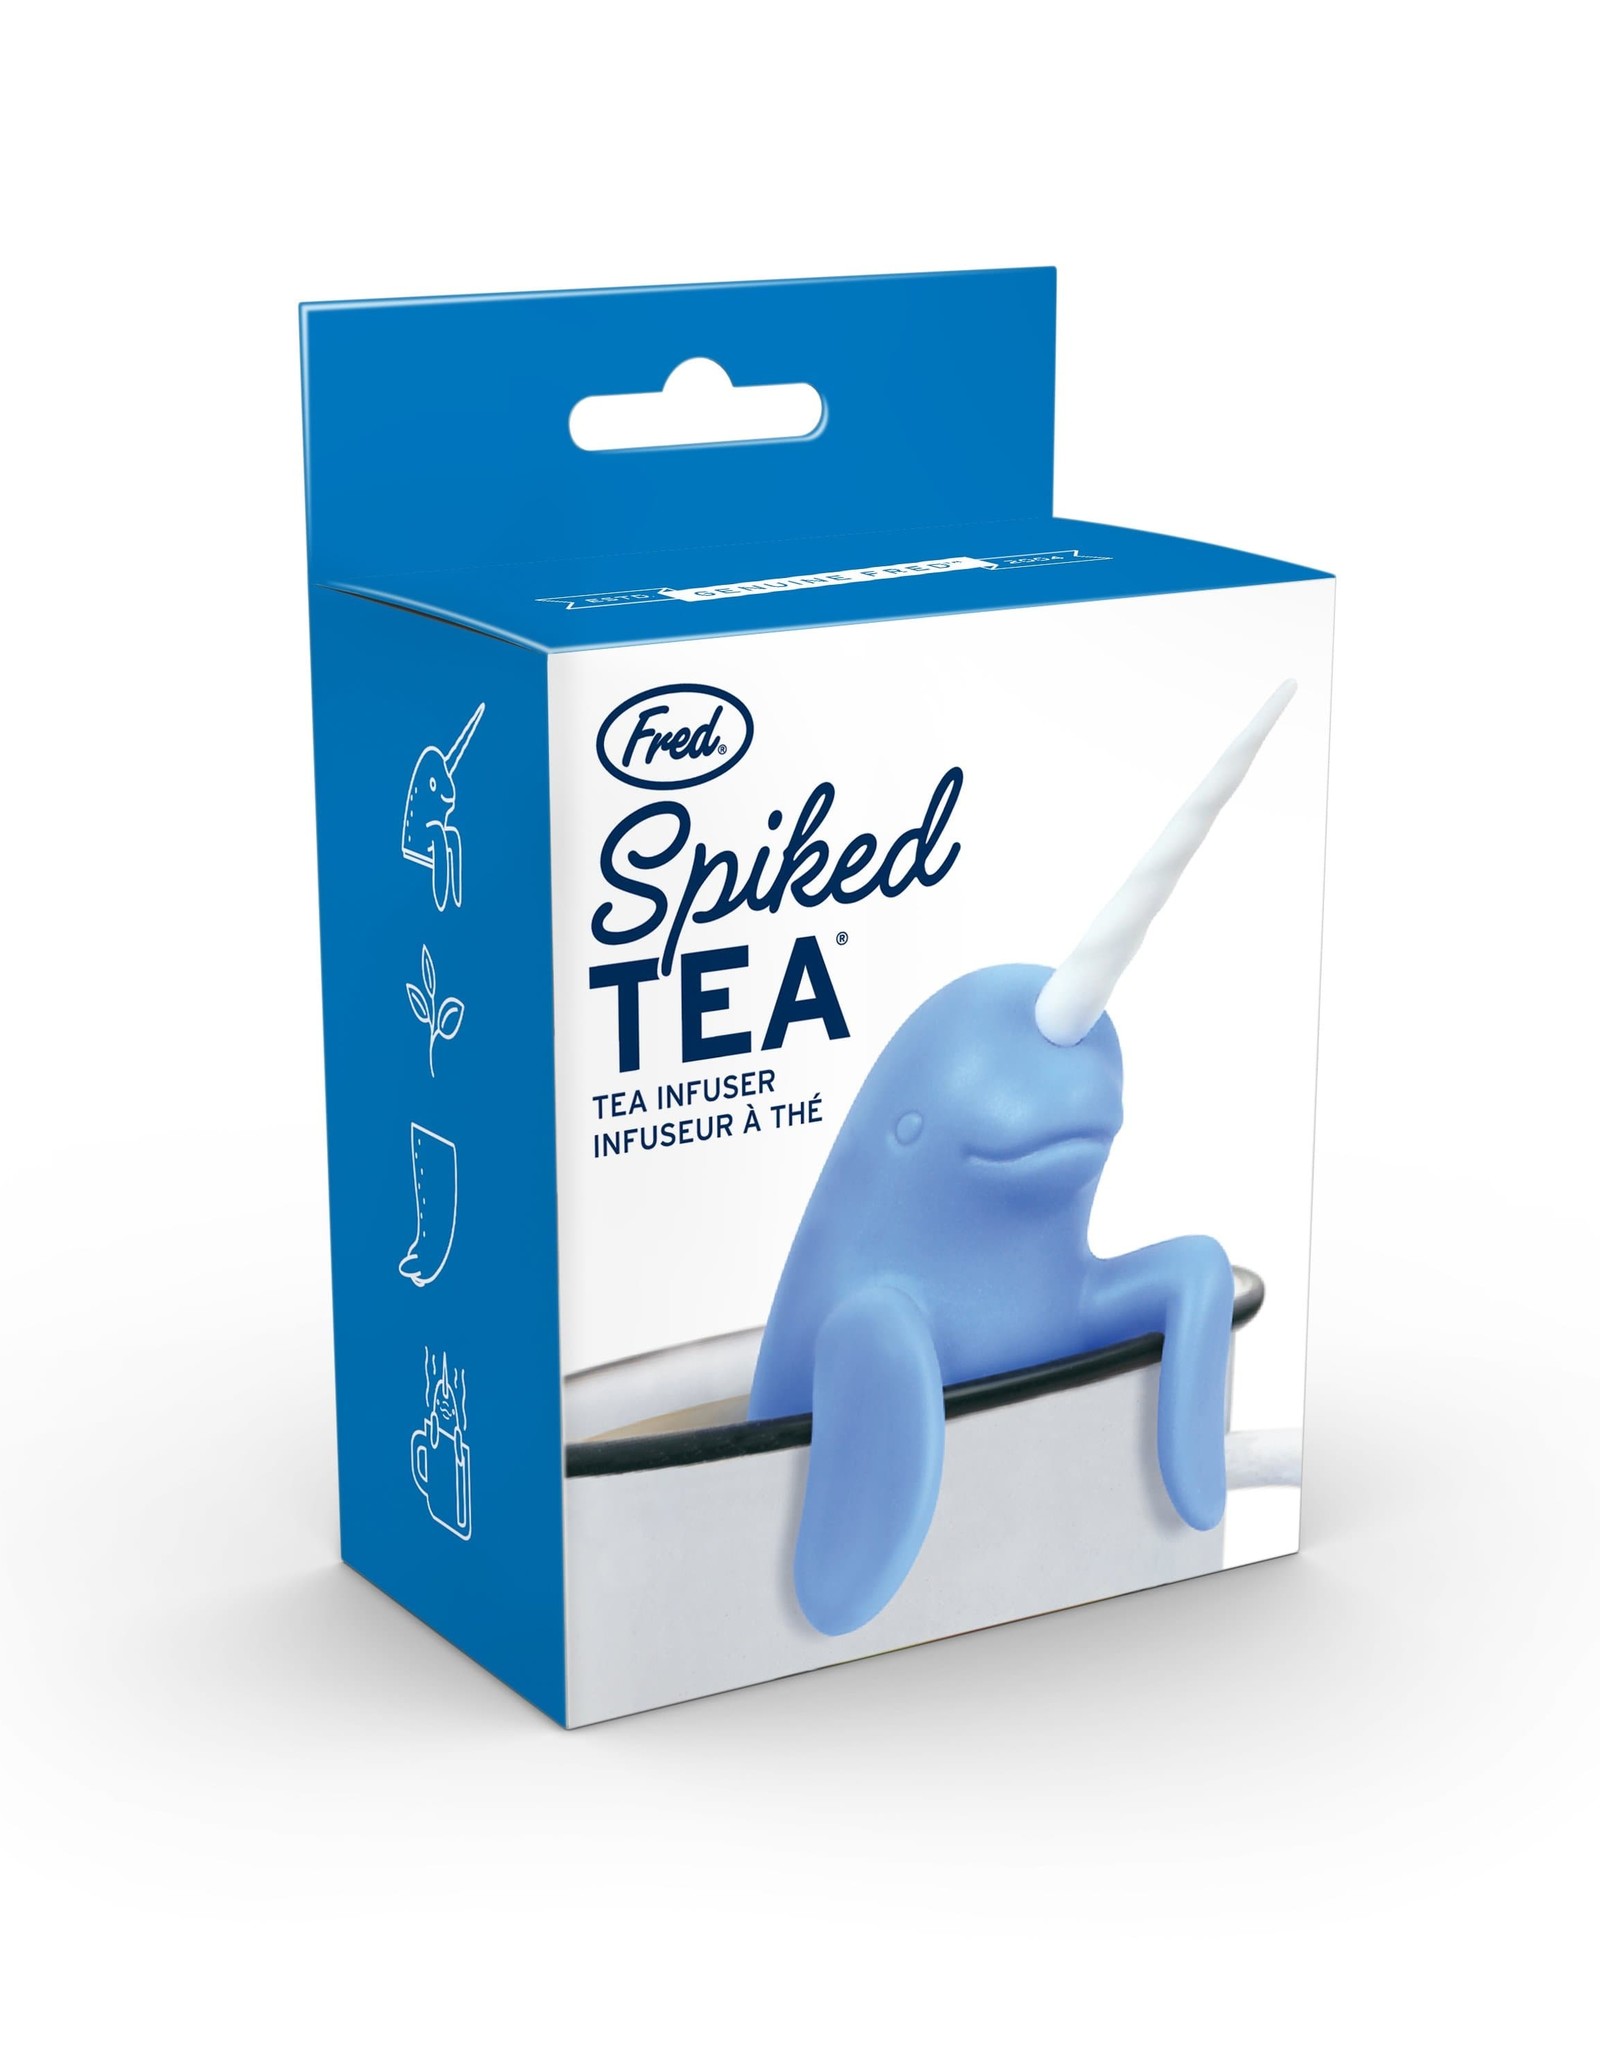 Fred and Friends Spiked Tea Narwhal Tea Infuser